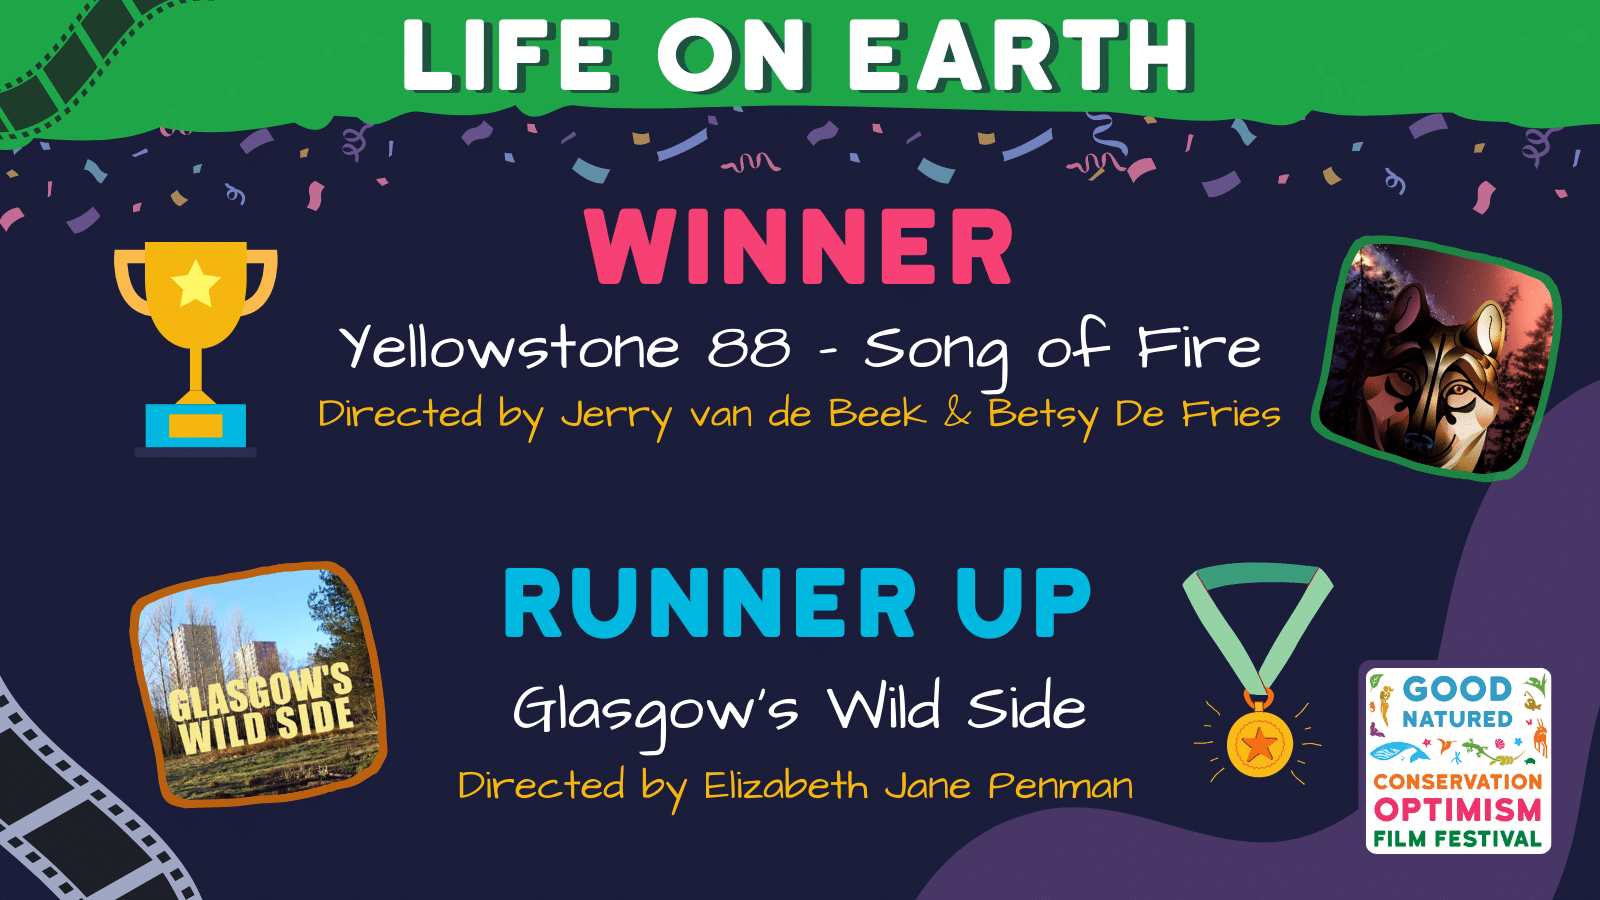 Our winner is: Yellowstone 88 - Song of Fire - Directed by Jerry van de Beek and Betsy De Fries